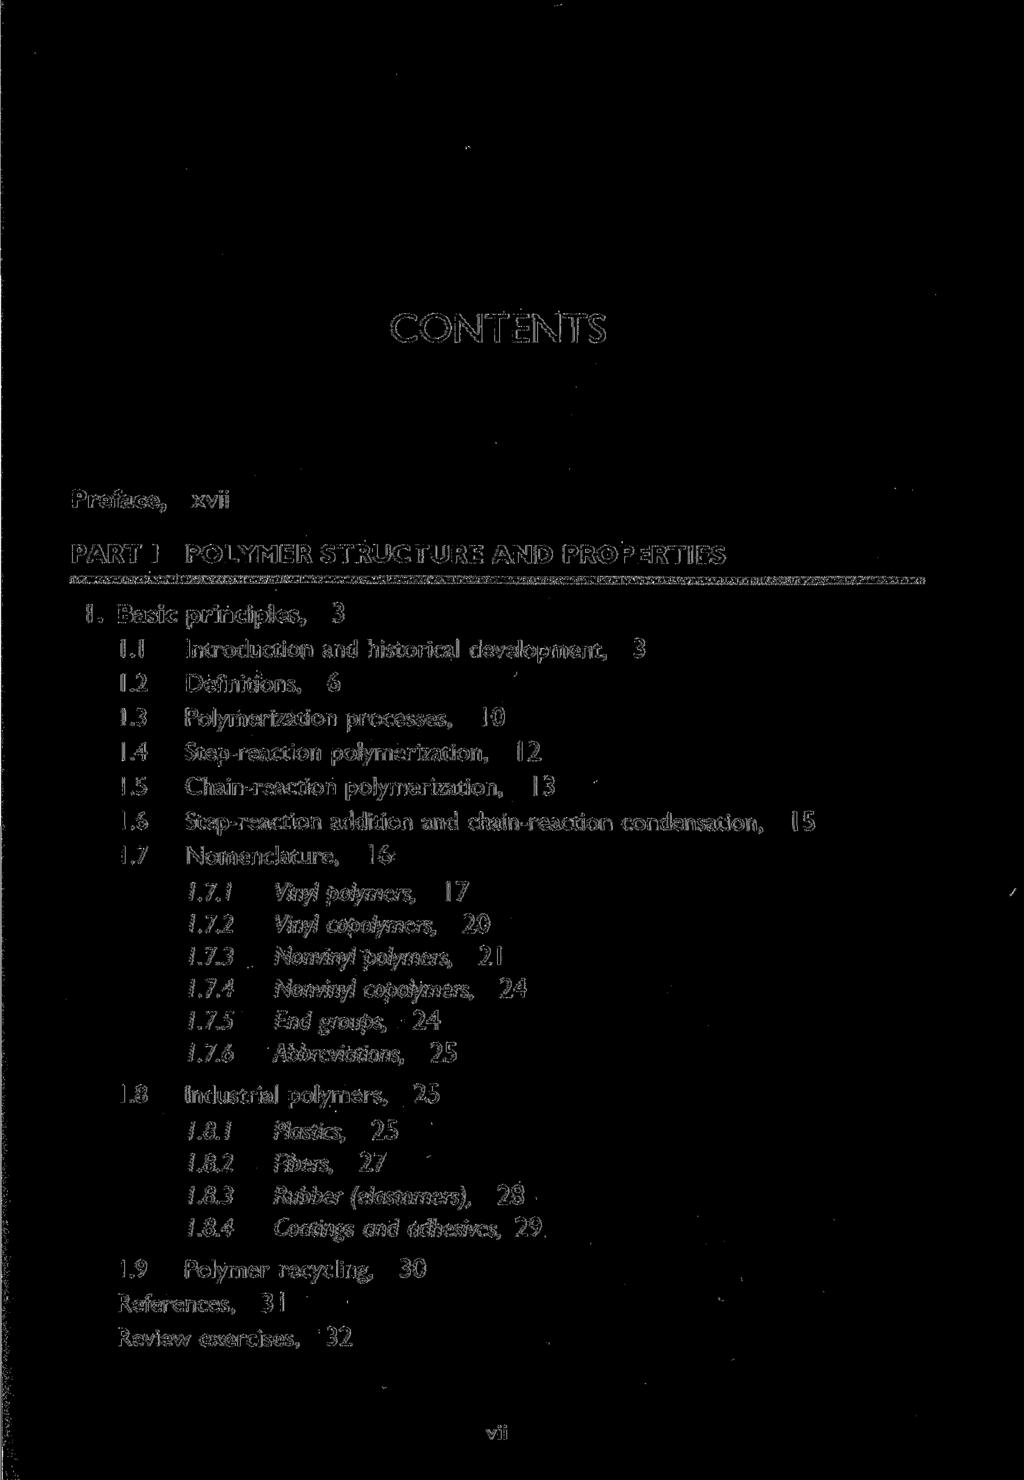 CONTENTS Preface, PART I xvii POLYMER STRUCTURE AND PROPERTIES I. Basic principles, 3 1.1 Introduction and historical development, 3 1.2 Definitions, 6 1.3 Polymerization processes, 10 1.